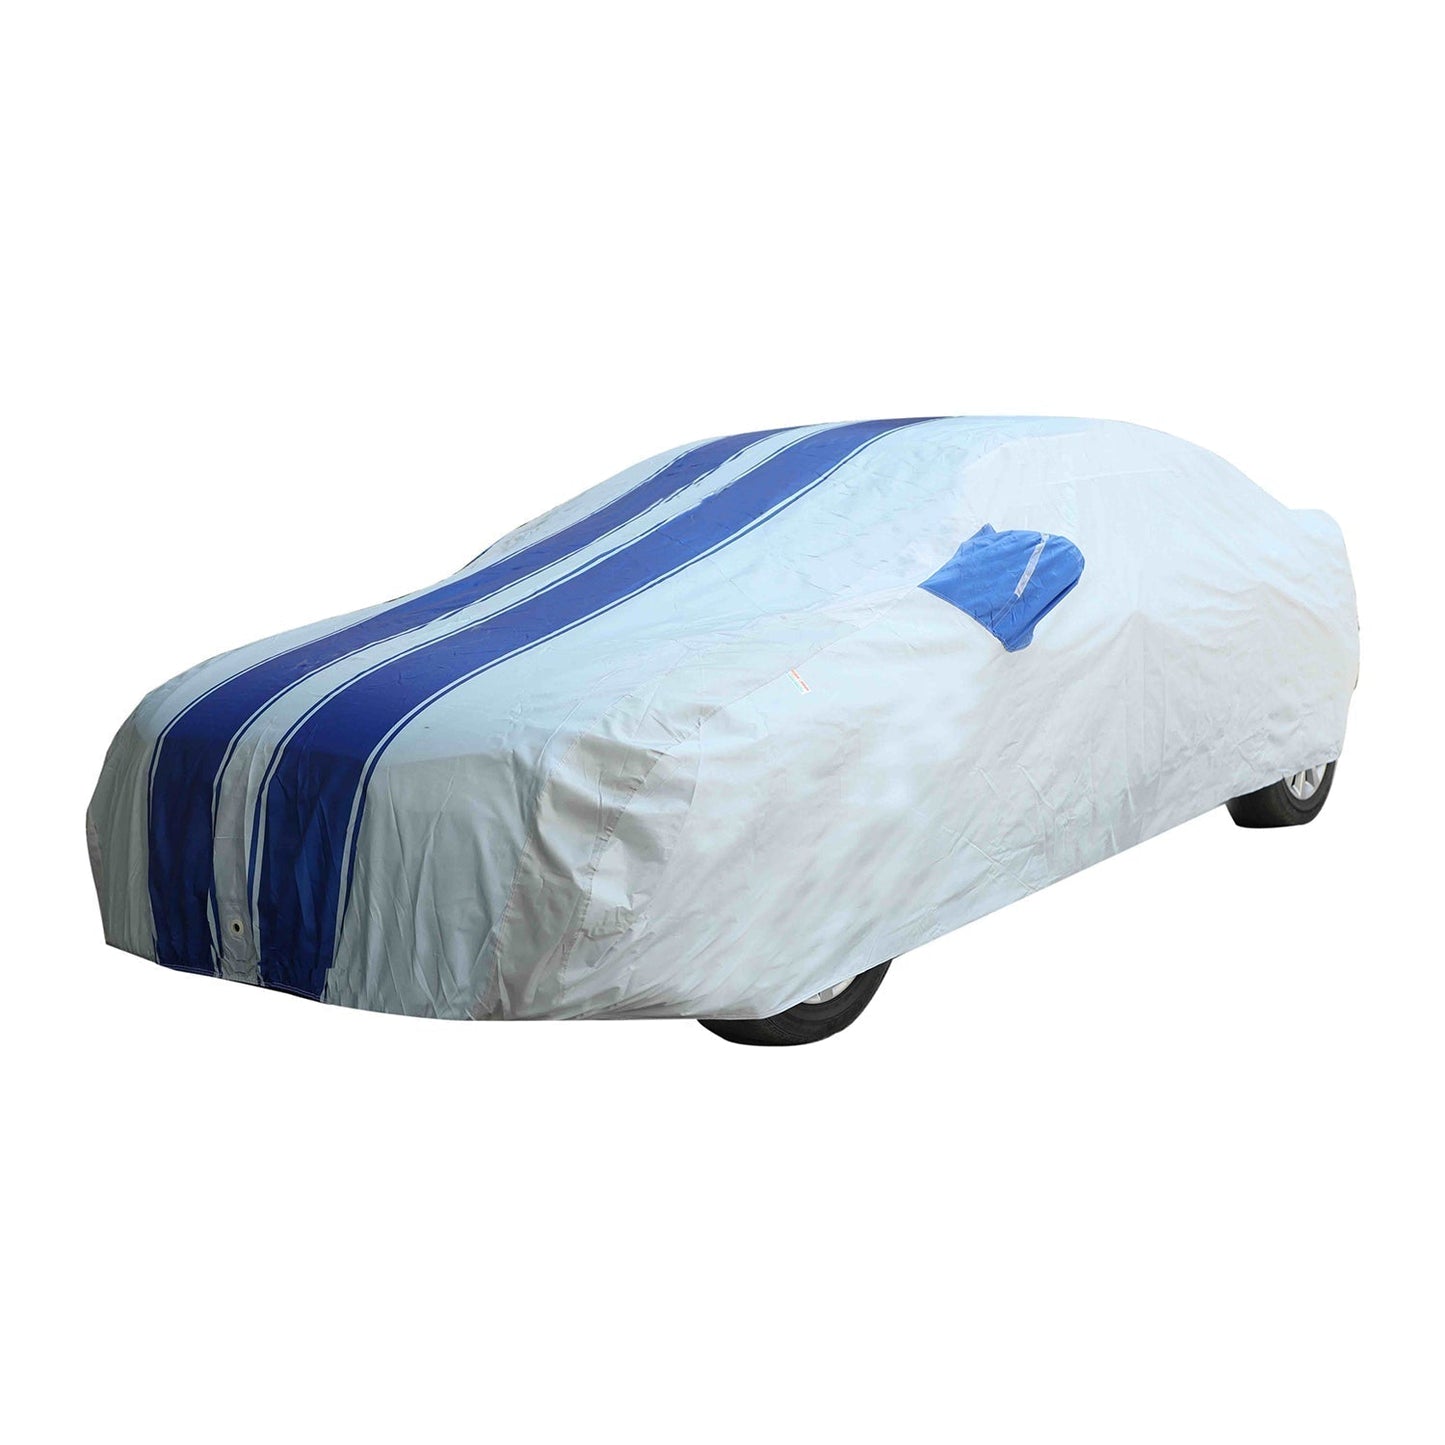 Oshotto 100% Blue dustproof and Water Resistant Car Body Cover with Mirror Pockets For Mercedes Benz E-Class 2017-2023